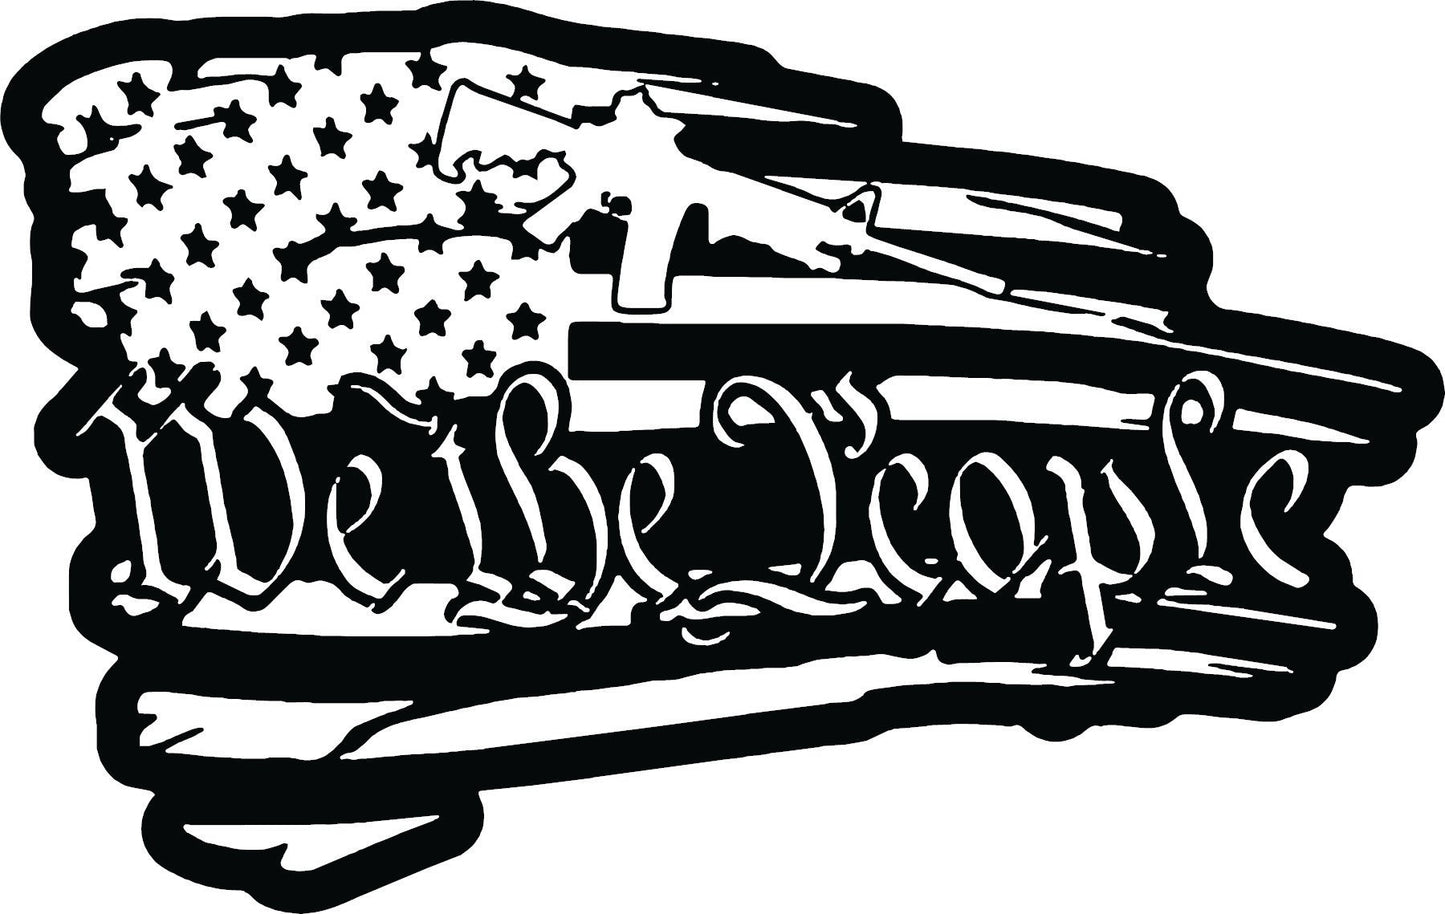 USA America - We The People Lettering Vinyl Decal Wall Window Car Sticker